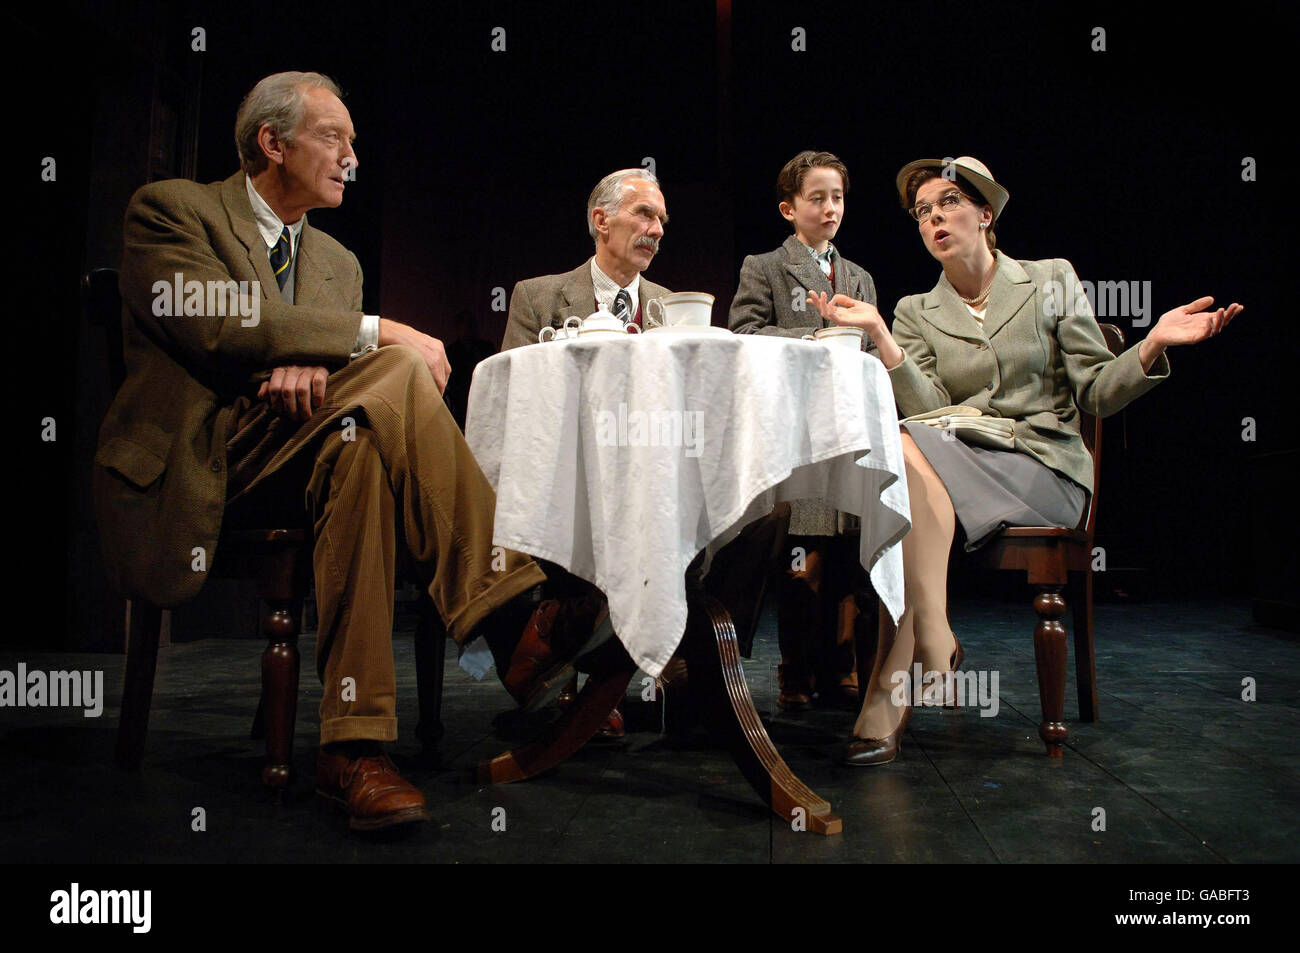 Charles Dance performs as CS Lewis, alongside (right to left) Richard Durden as Major W H Lewis, Jonah Lees as Douglas Gresham and Janie Dee as Joy Gresham, during a rehearsal of Shadowlands at Wyndham's Theatre, London. Stock Photo